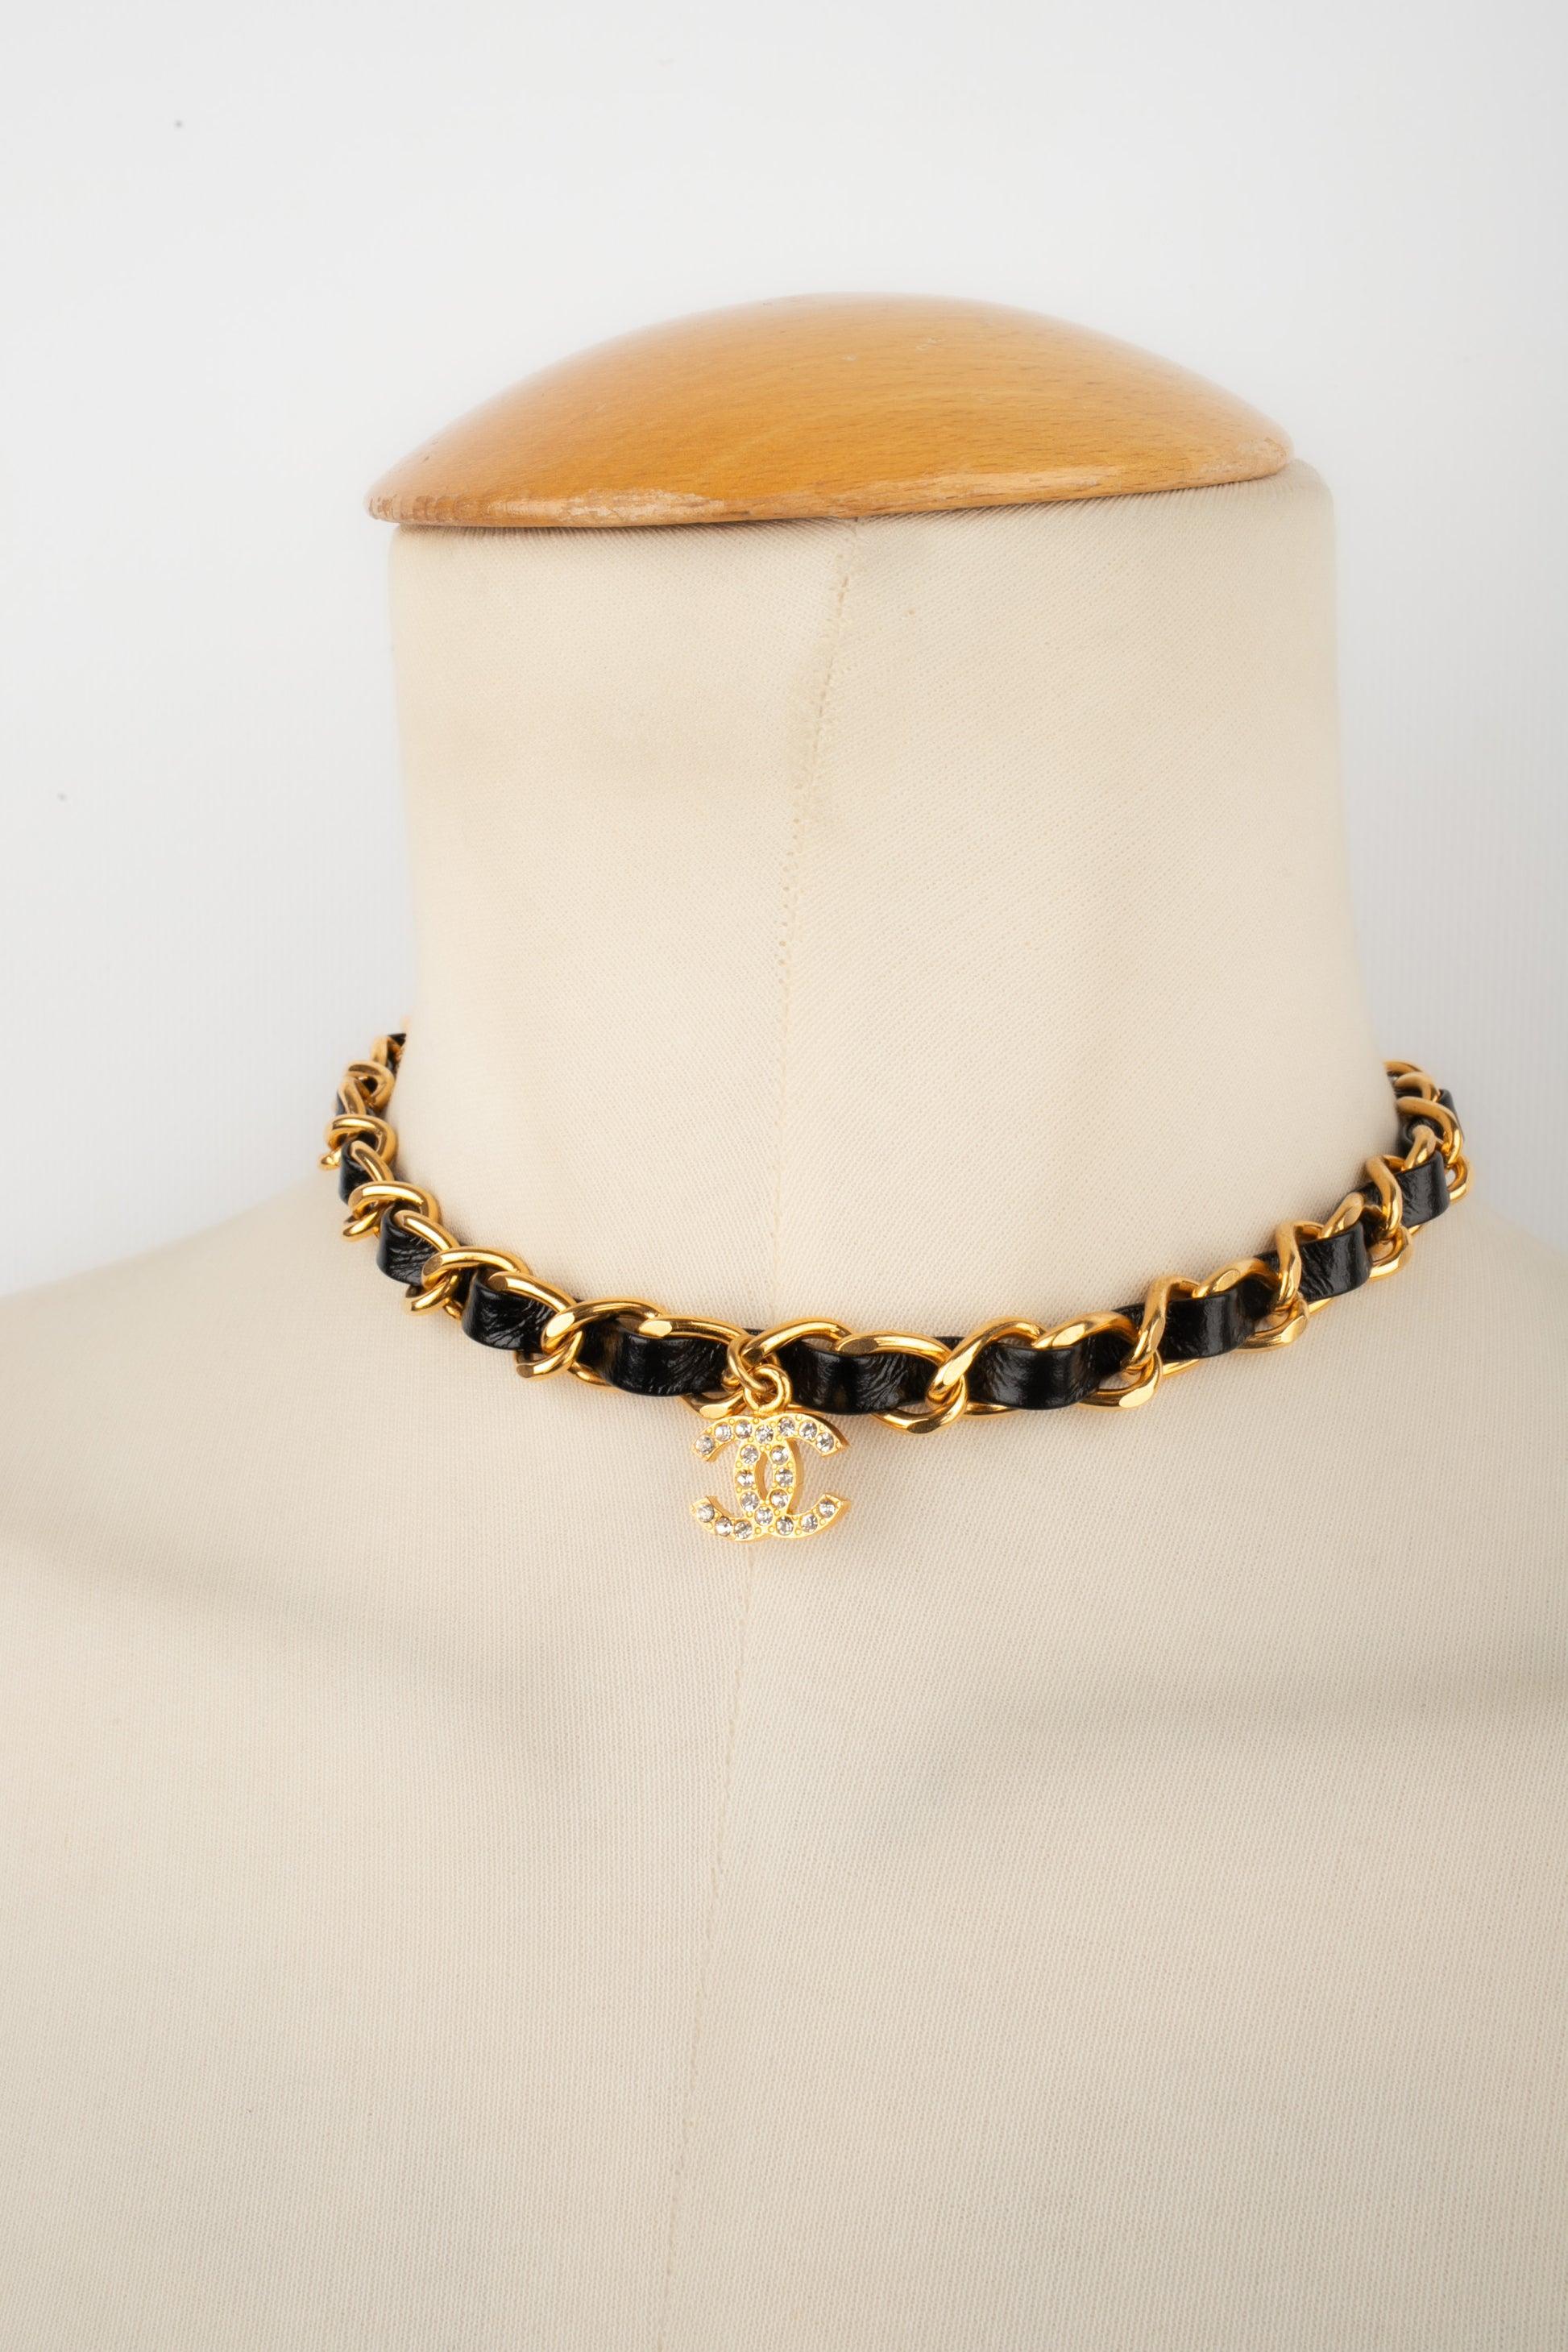 Chanel - (Made in France) Golden metal short necklace with patent leather. The cc pendant is ornamented with rhinestones. 1995 Spring-Summer Collection.

Additional information:
Condition: Very good condition
Dimensions: Length: from 33 cm to 39